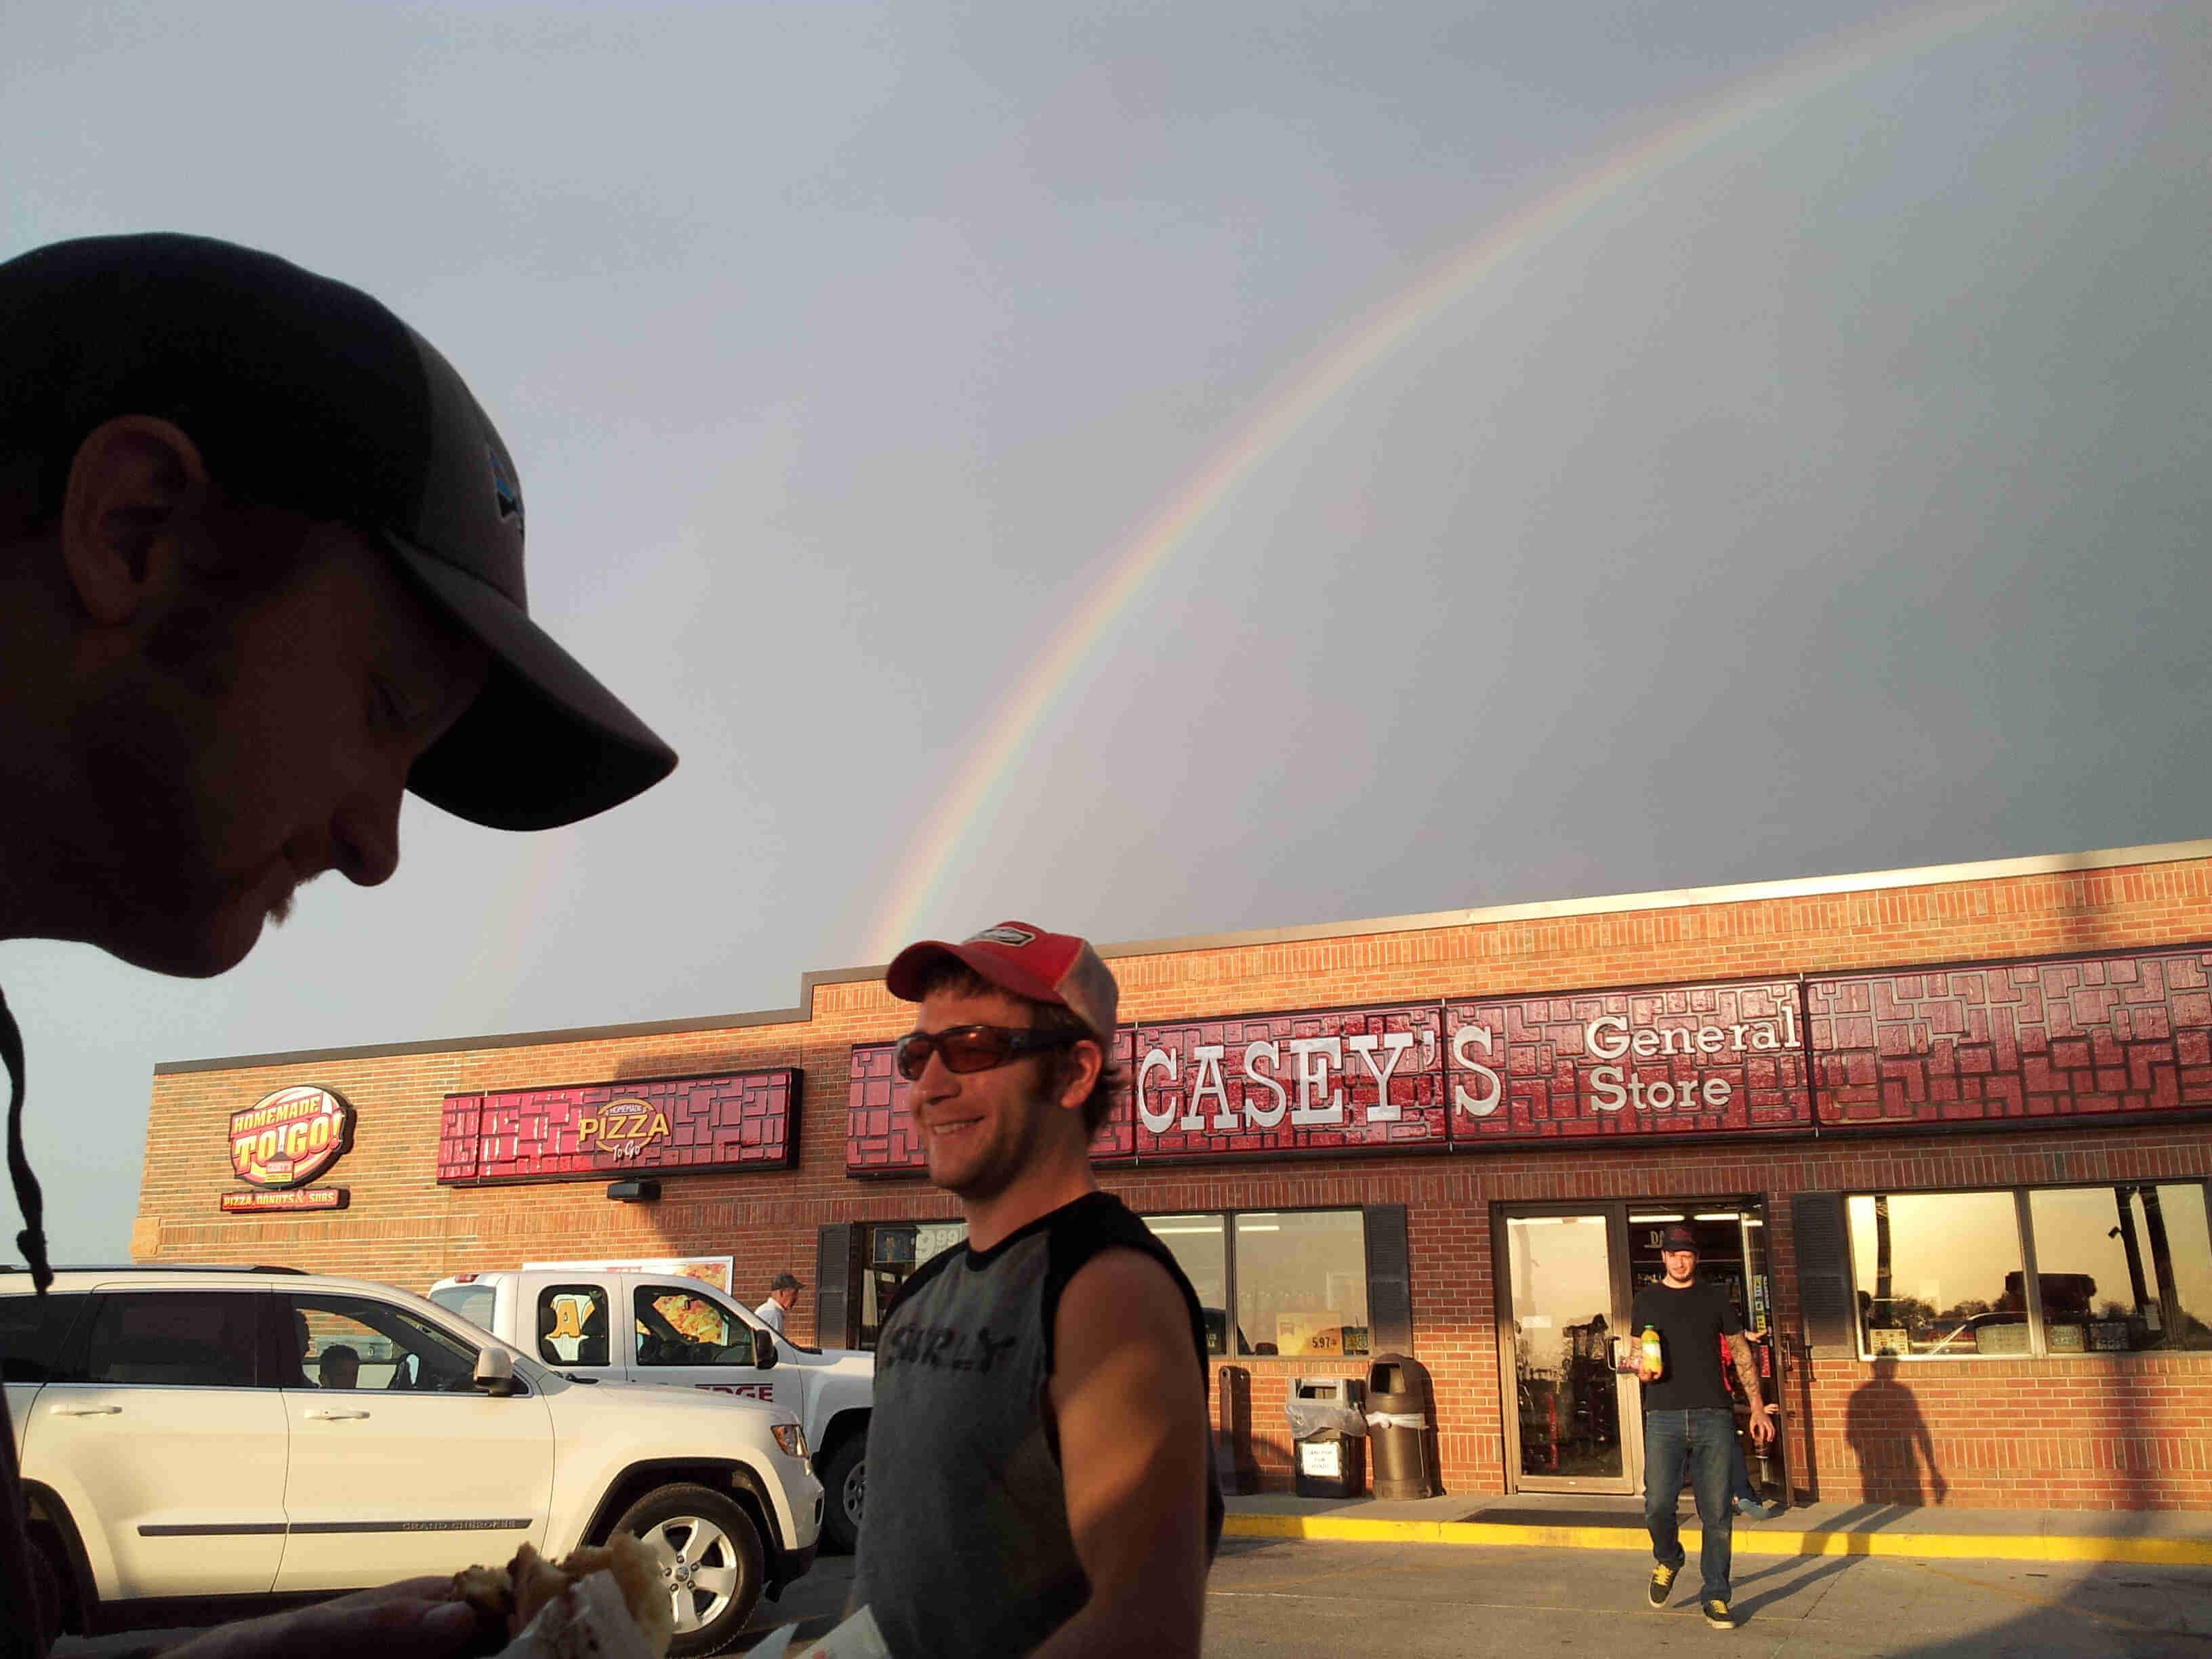 Front view of people outside of a CASEY's general store, with a rainbow arching over